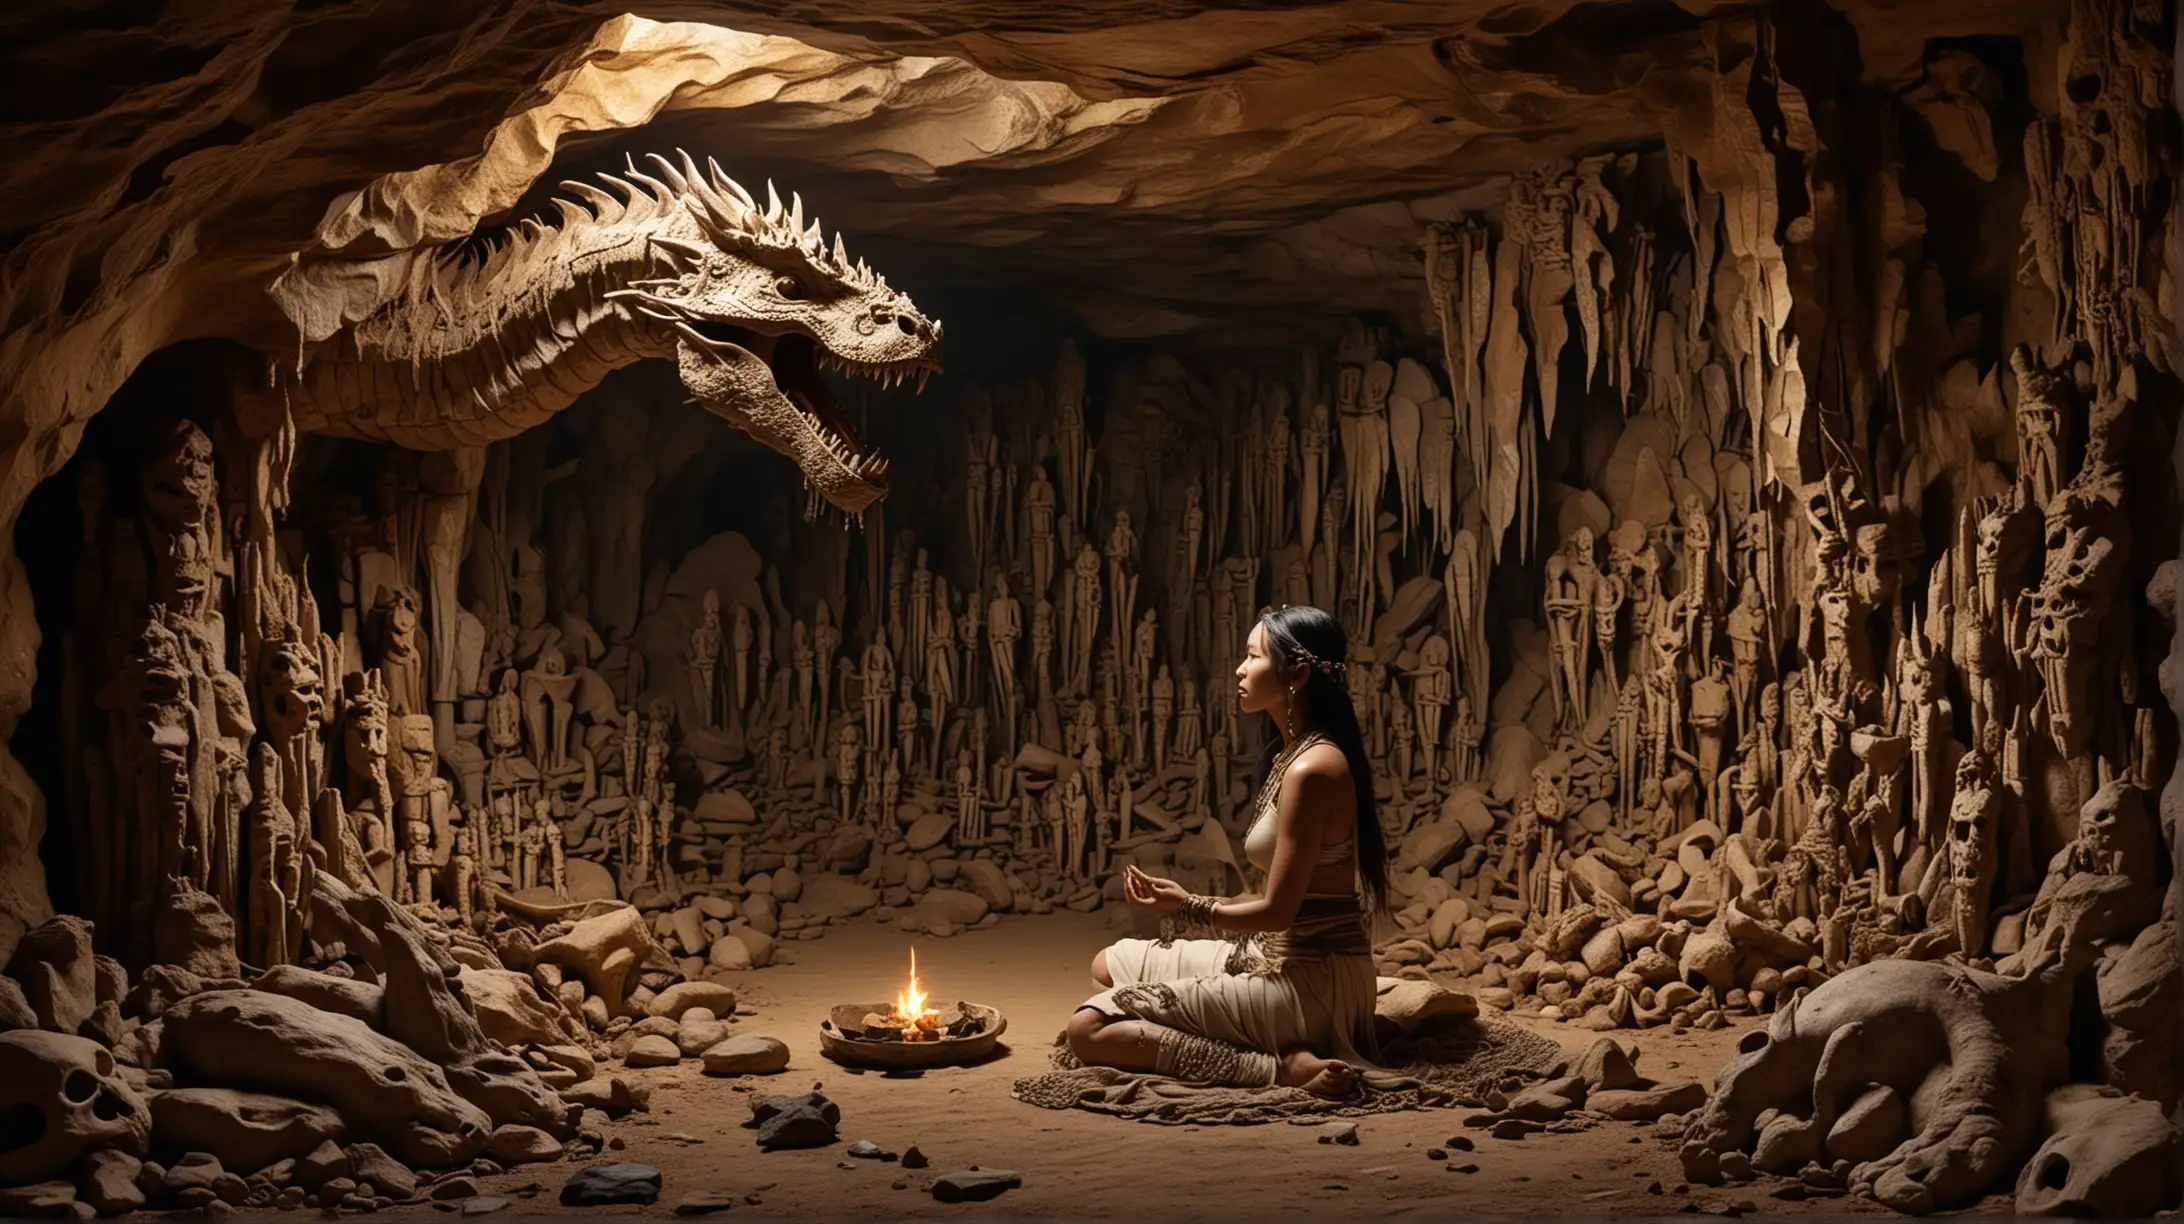 in a cave, shrine of the dragon god with effigy of a great beast constructed out of old dinosaur bones, sensual tribal woman gather and worship beneath the god, realistic and dramatic in style